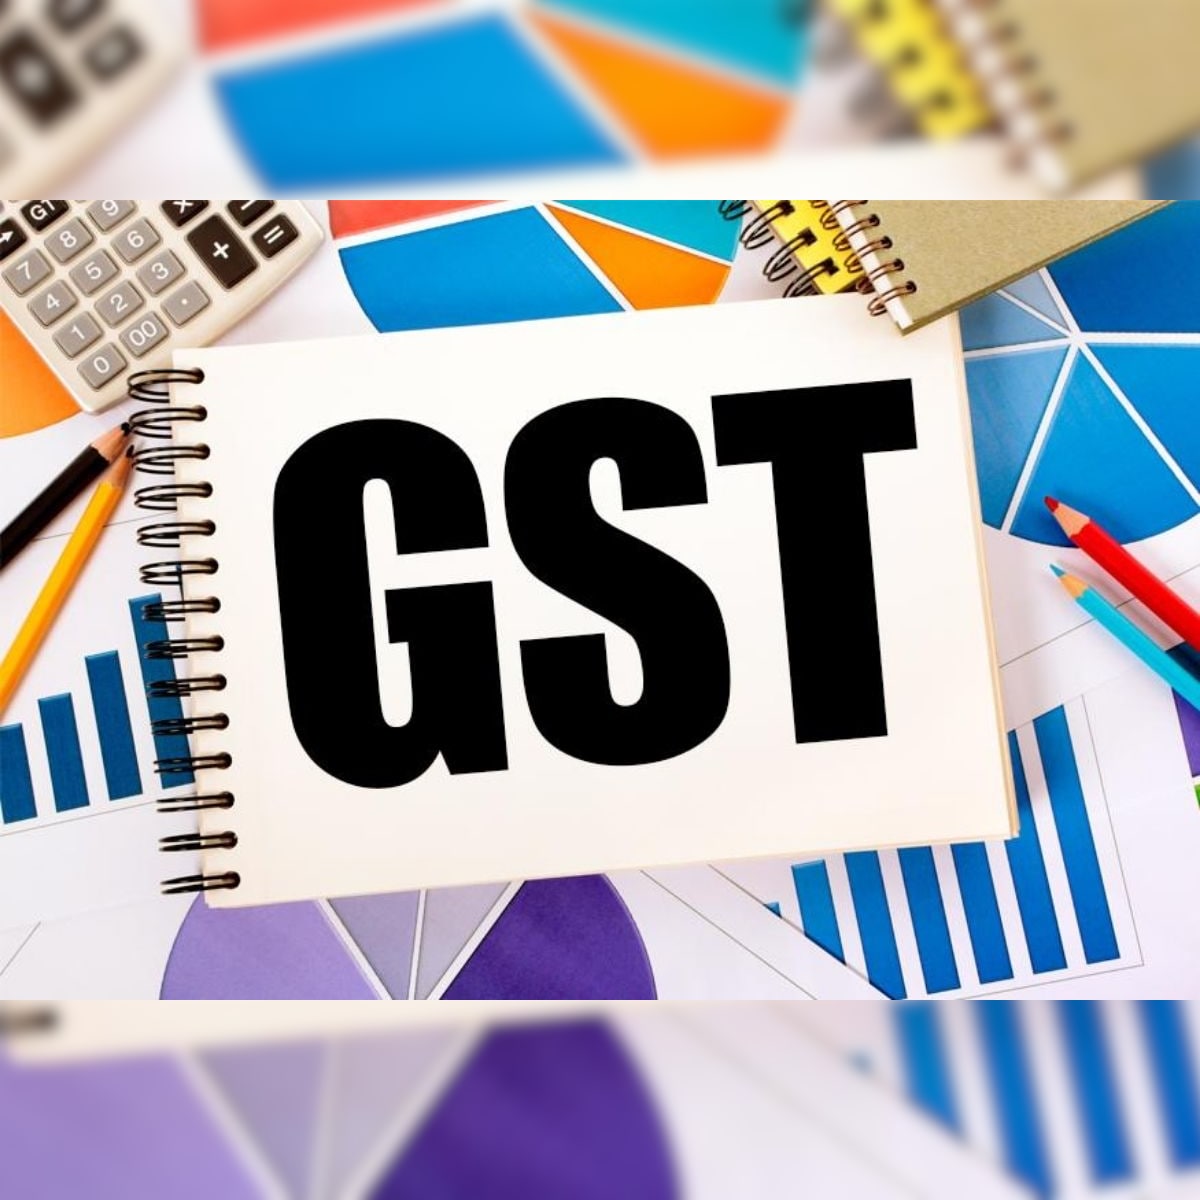 How to apply for New GST in India?